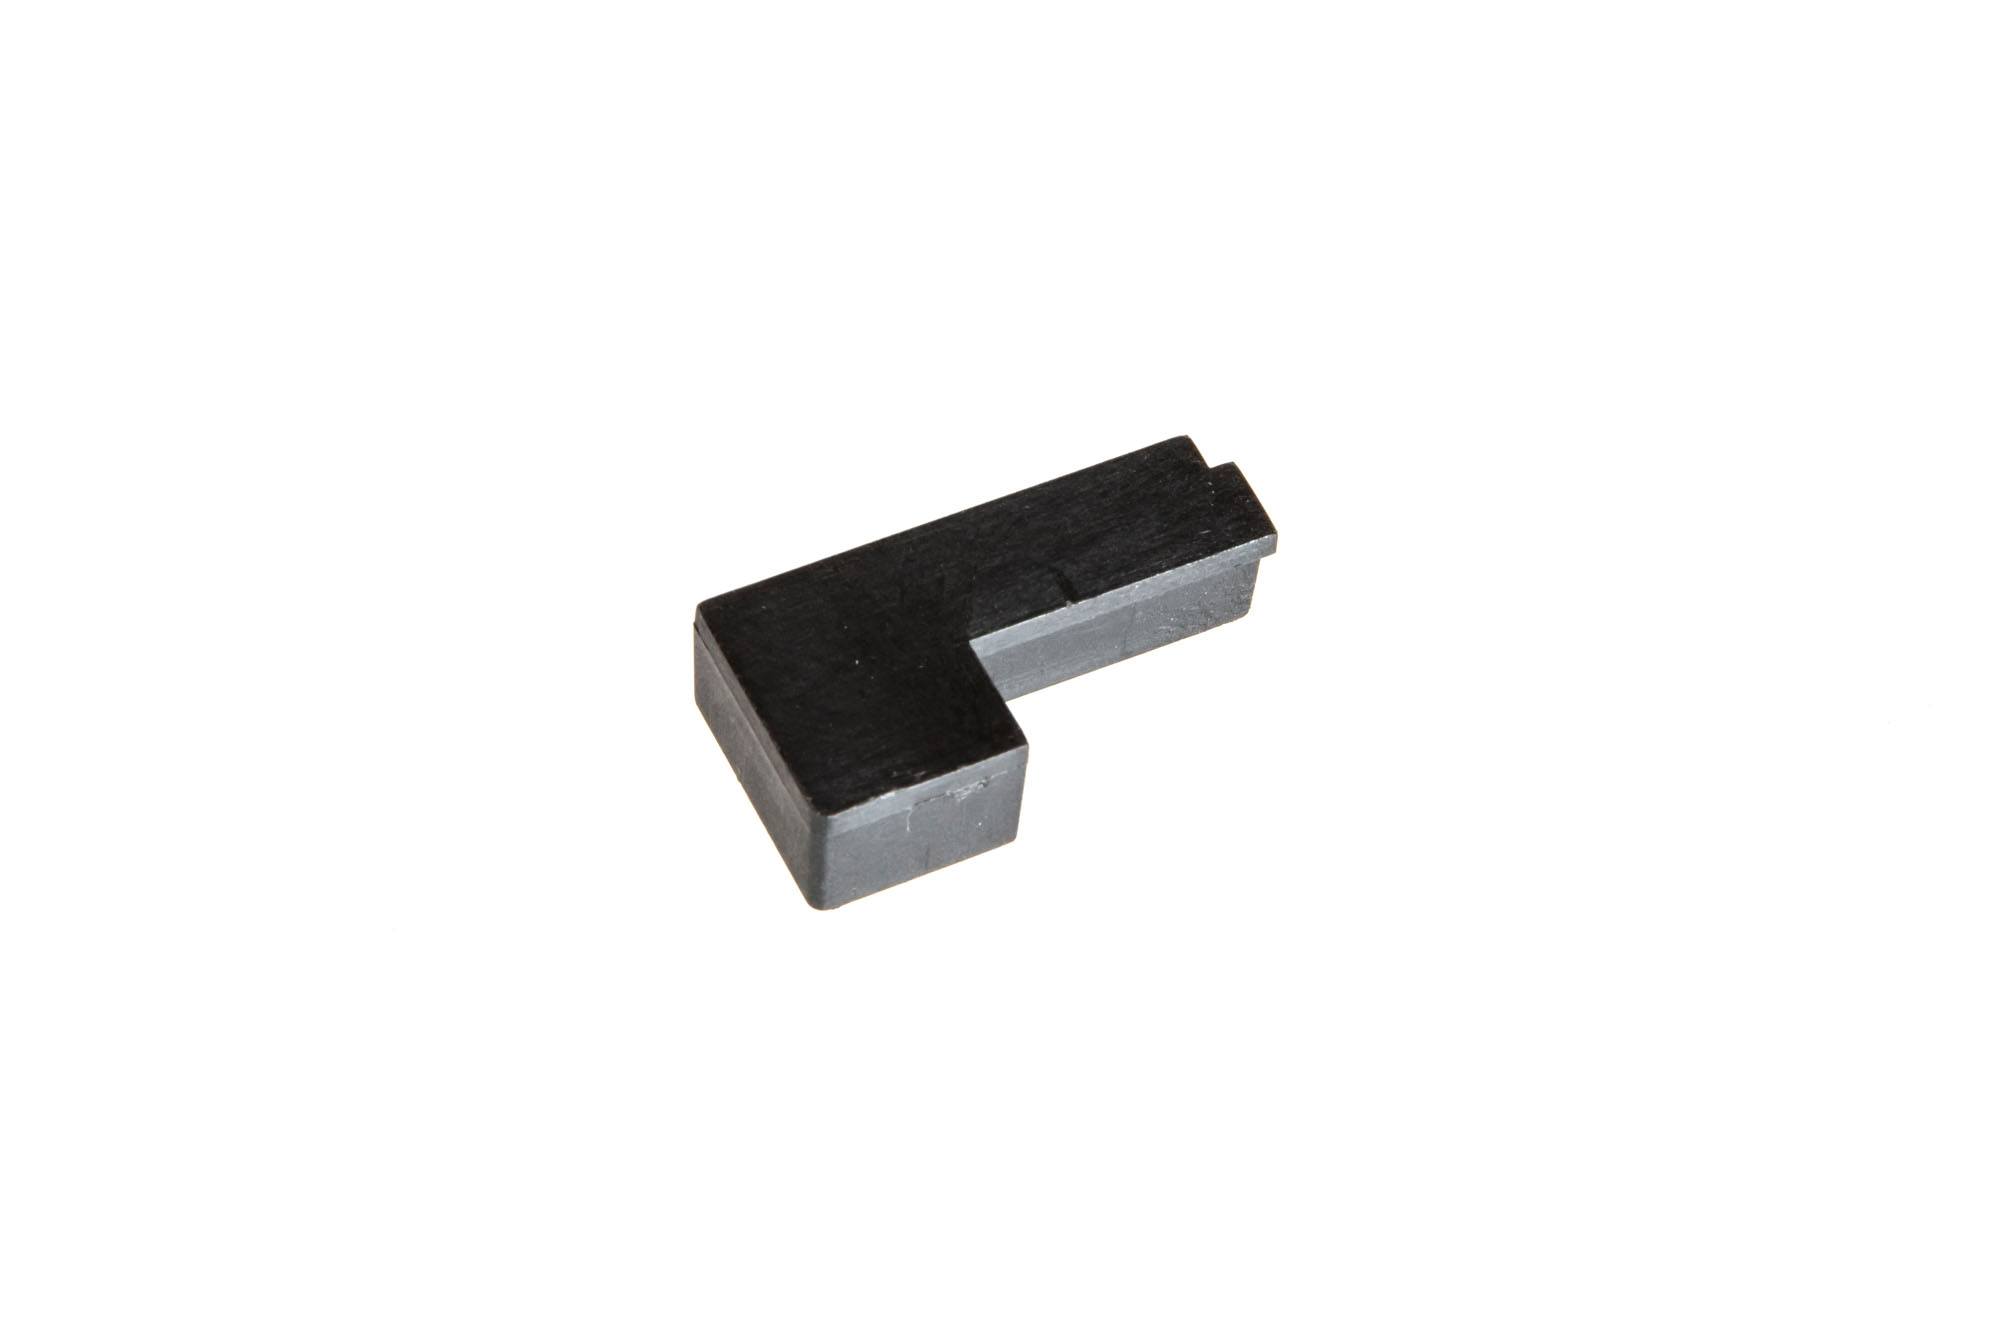 Hop-Up Chamber Block for AK / Specna Arms J-Series